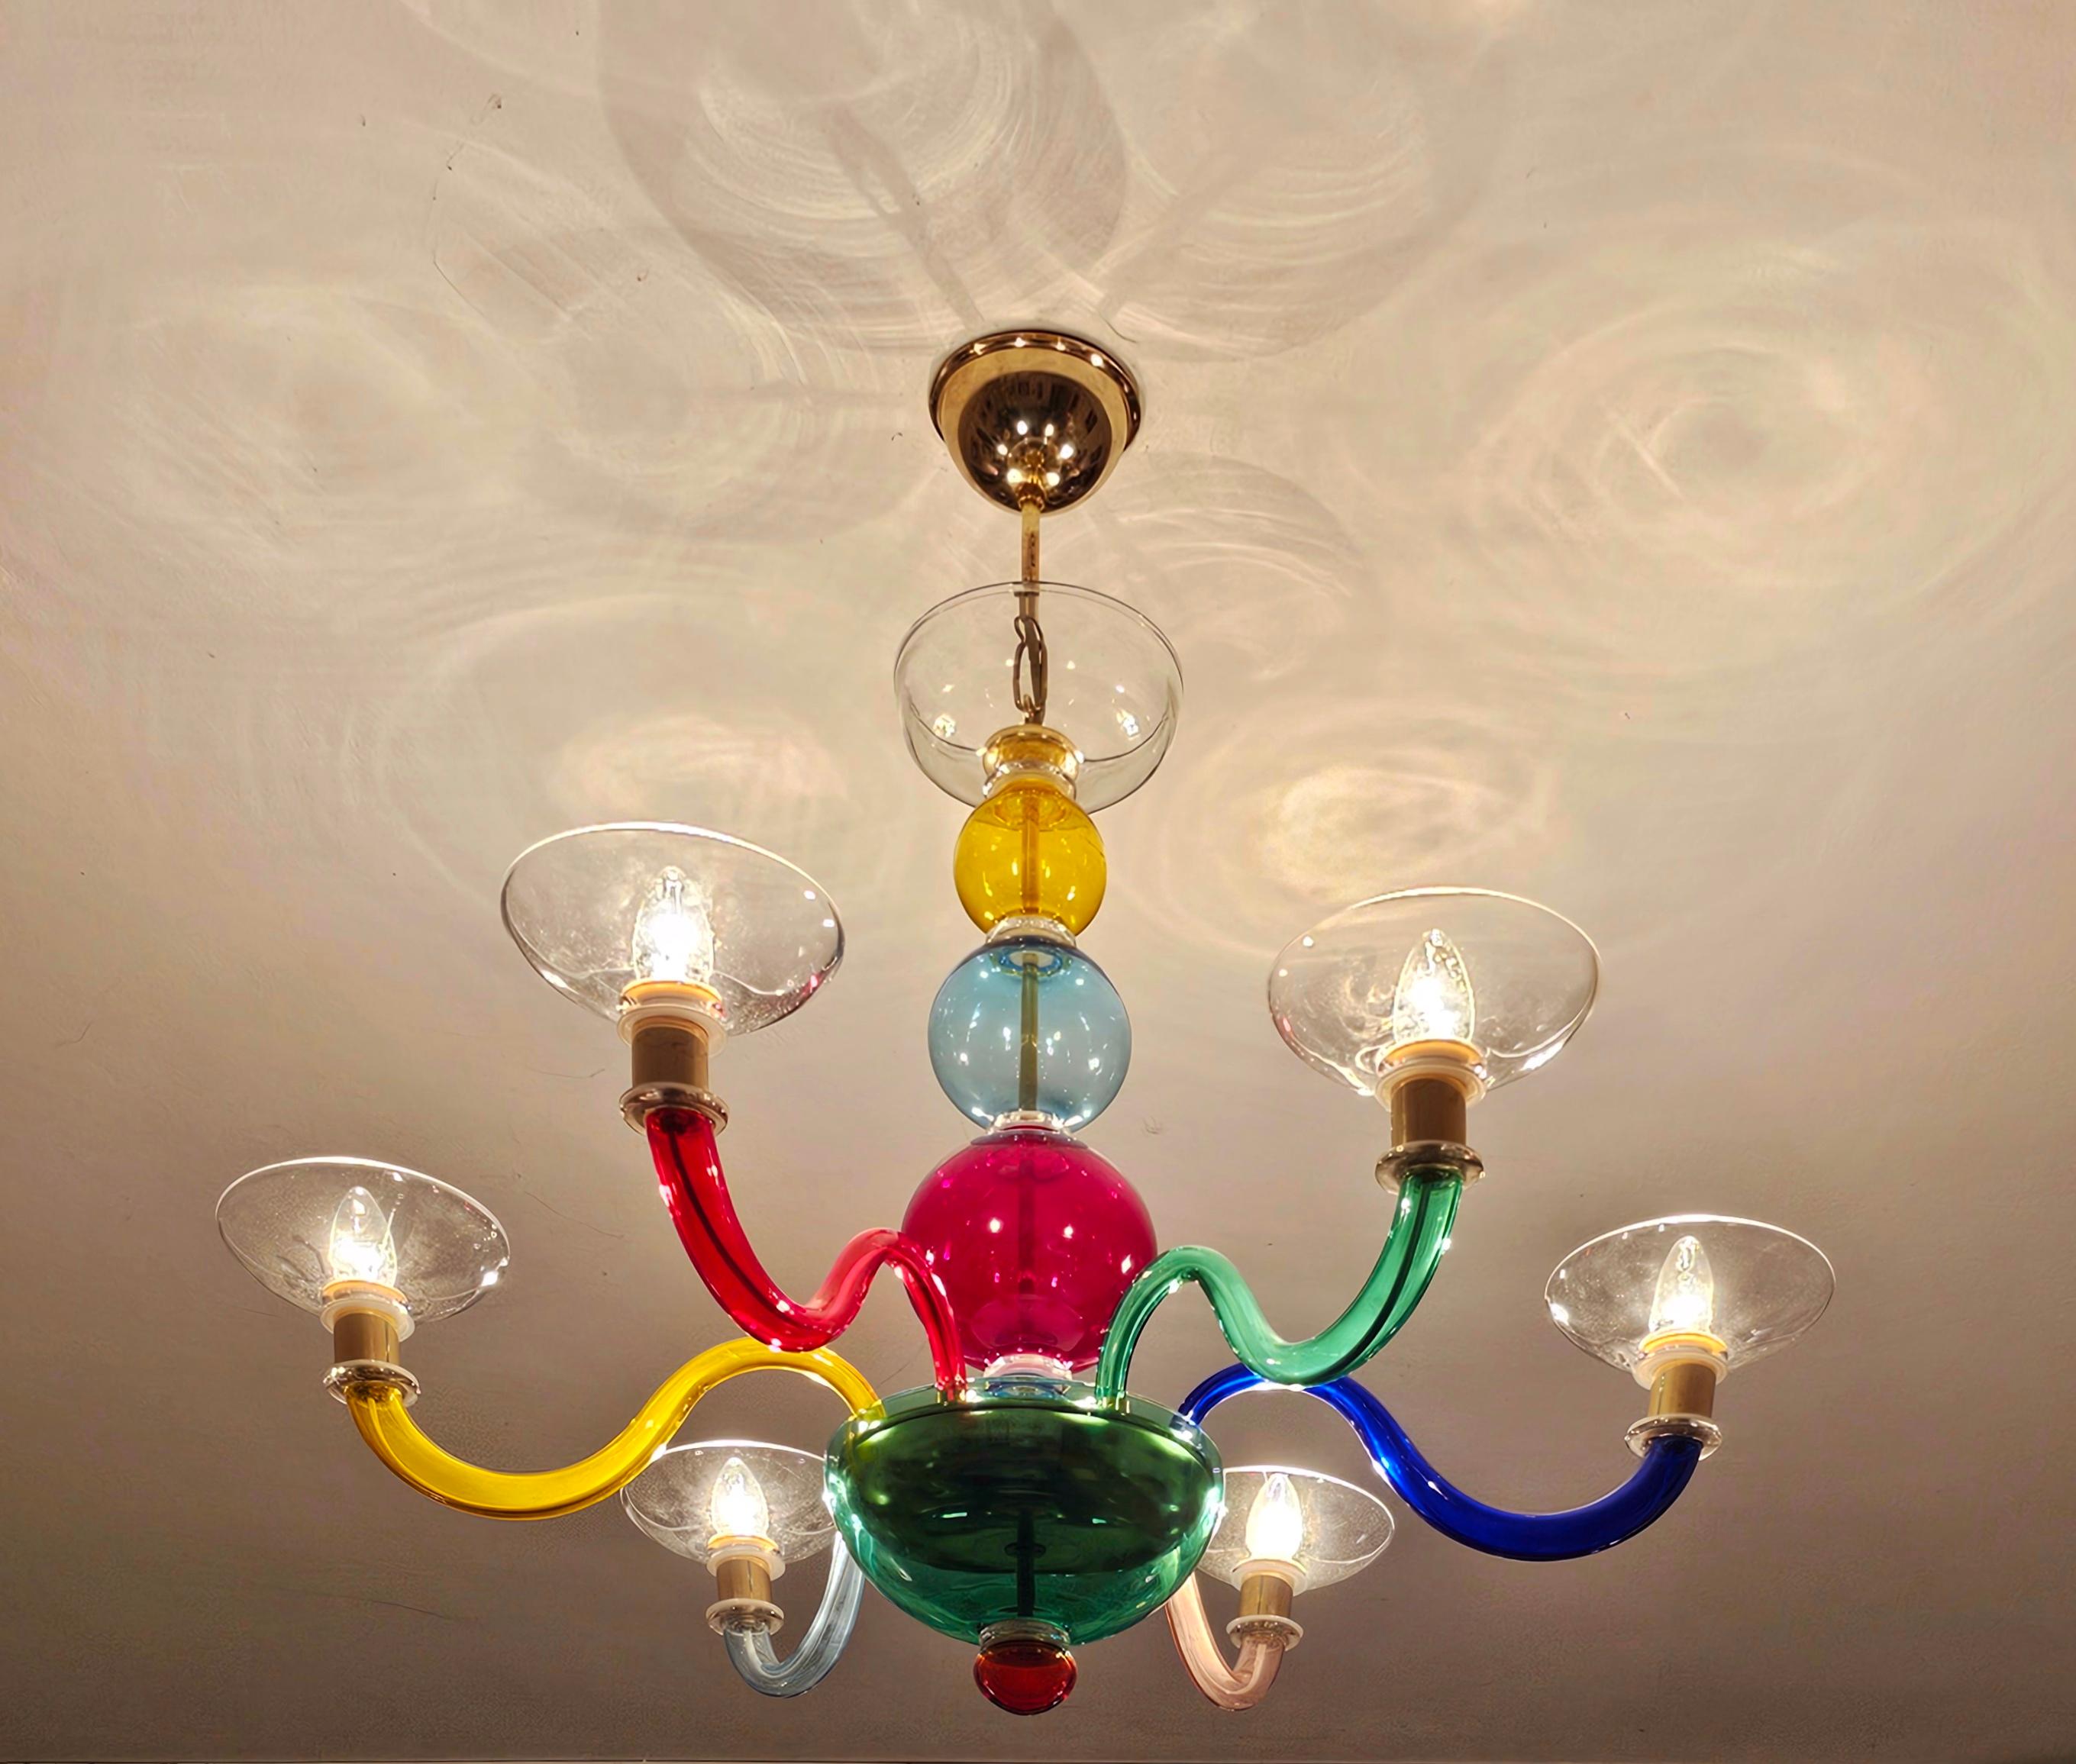 In this listing you will find a mesmerizing multicolor Murano Glass chandelier in style Gio Ponti for Venini. This 6-arm chandelier features beautiful mouthblown glass in 7 colours - yellow, red, green, pink, indigo, baby blue and clear glass - and